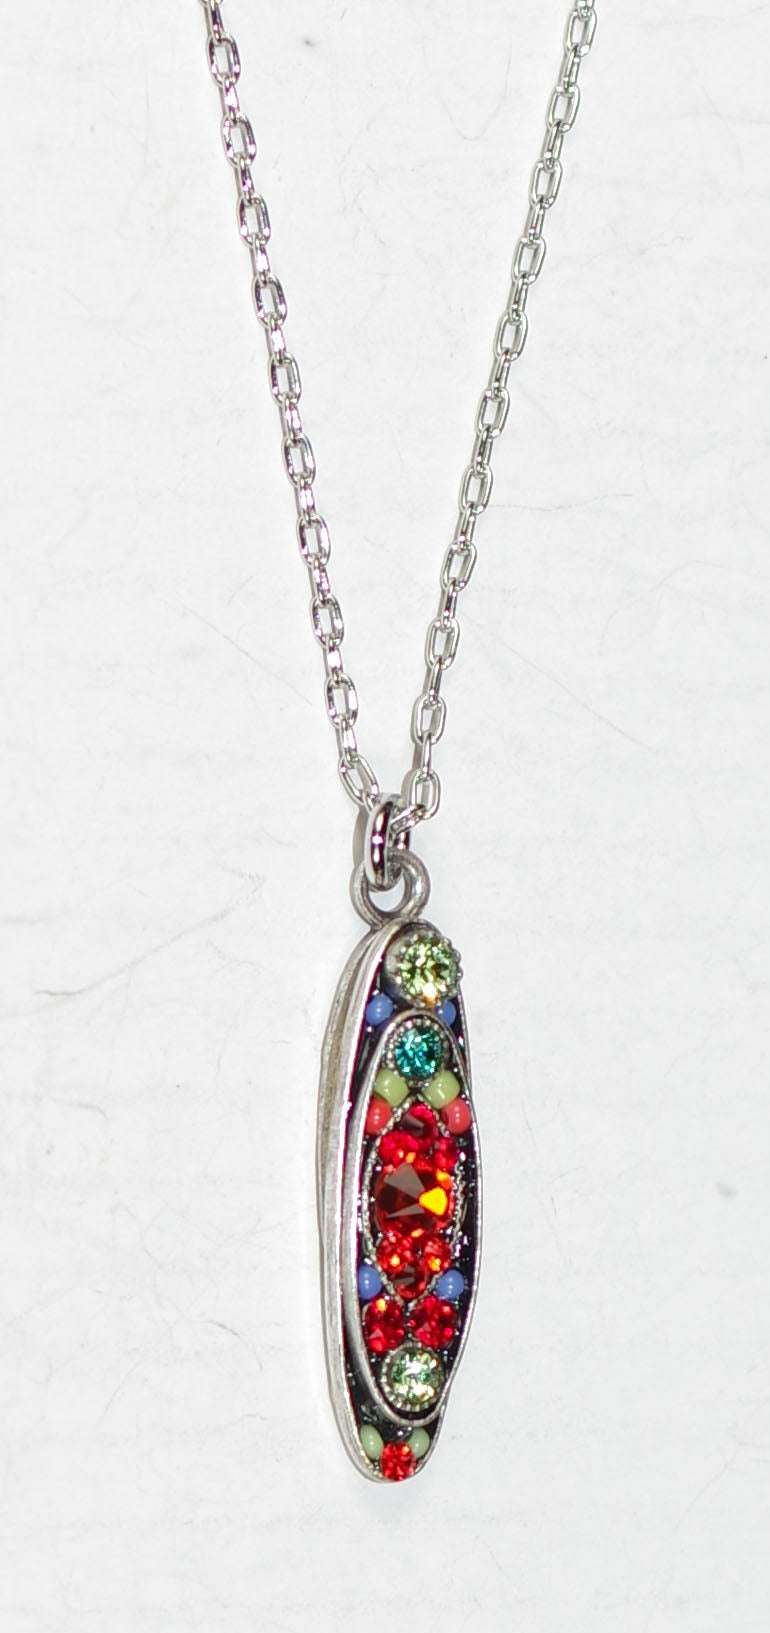 FIREFLY NECKLACE SPARKLE LONG PENDANT MC: multi color stones in 1" pendant, silver 18" adjustable chain